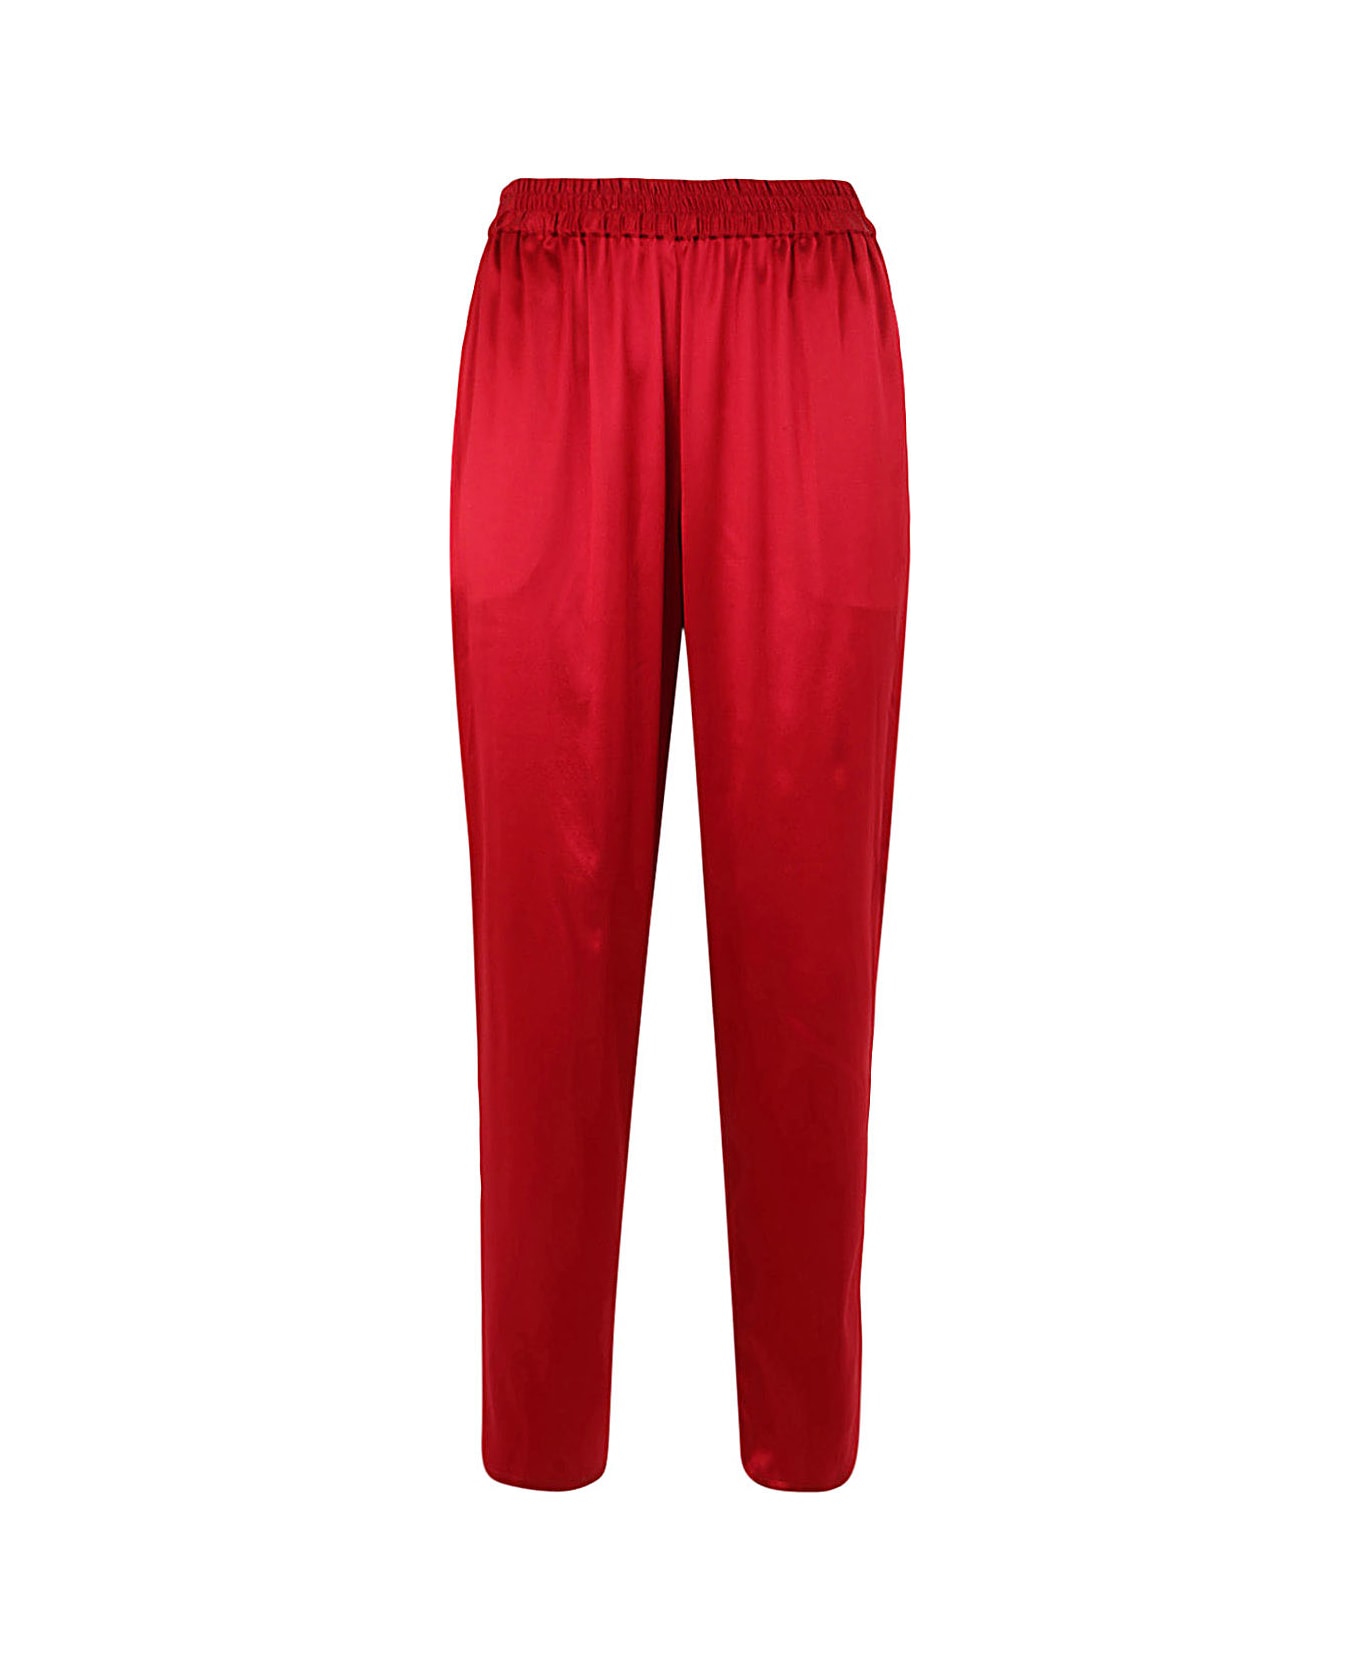 Gianluca Capannolo Mila Slim Trouser With Elastic - Pink ボトムス